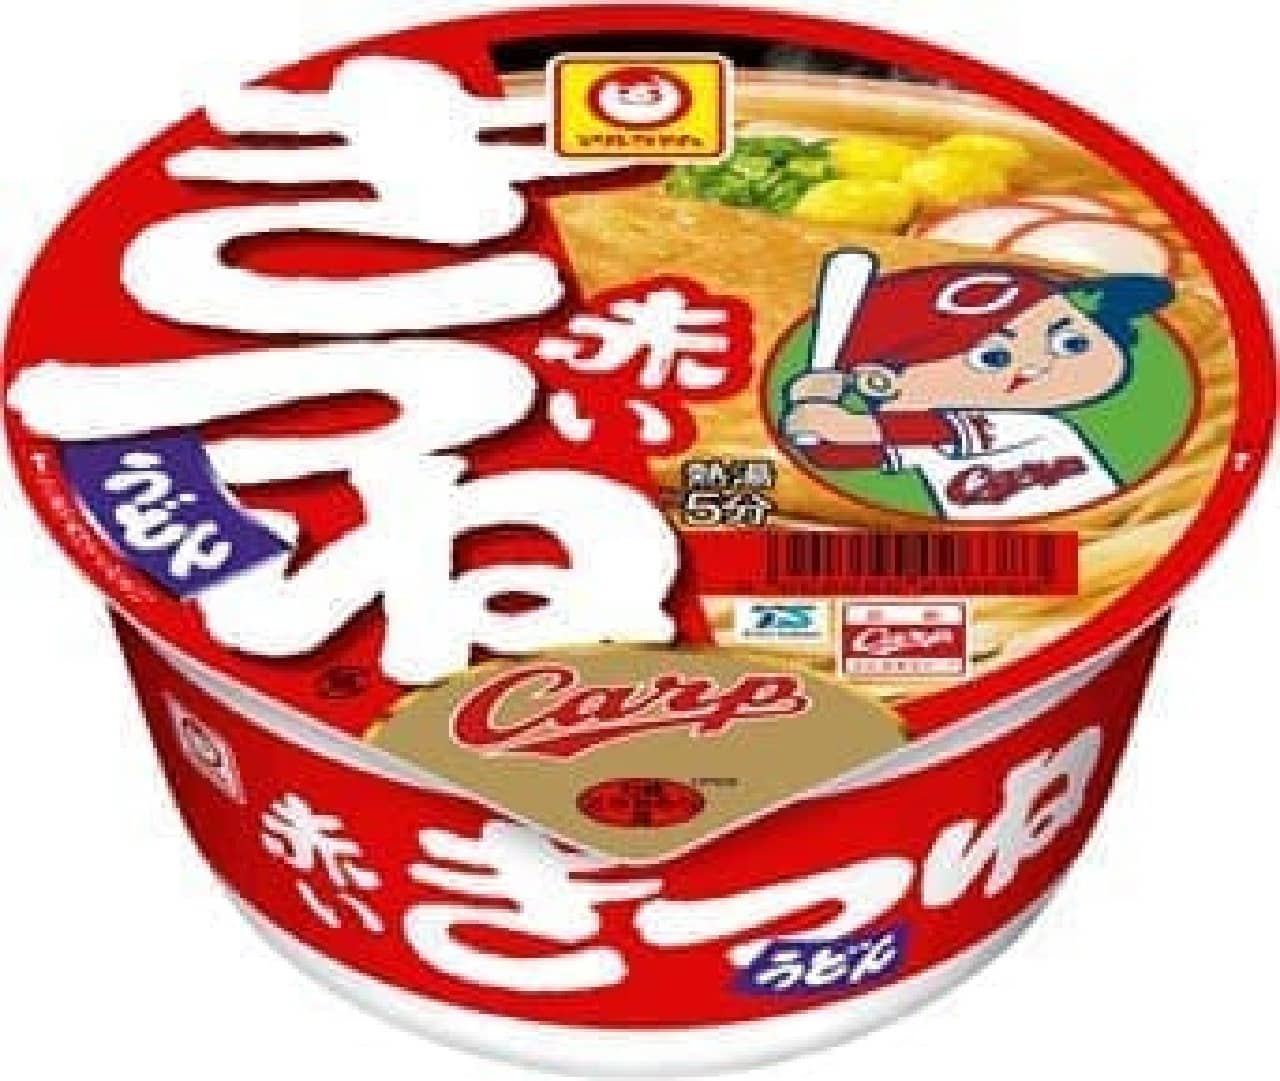 Maru-chan Red Kitsune Udon Carp Support Cup